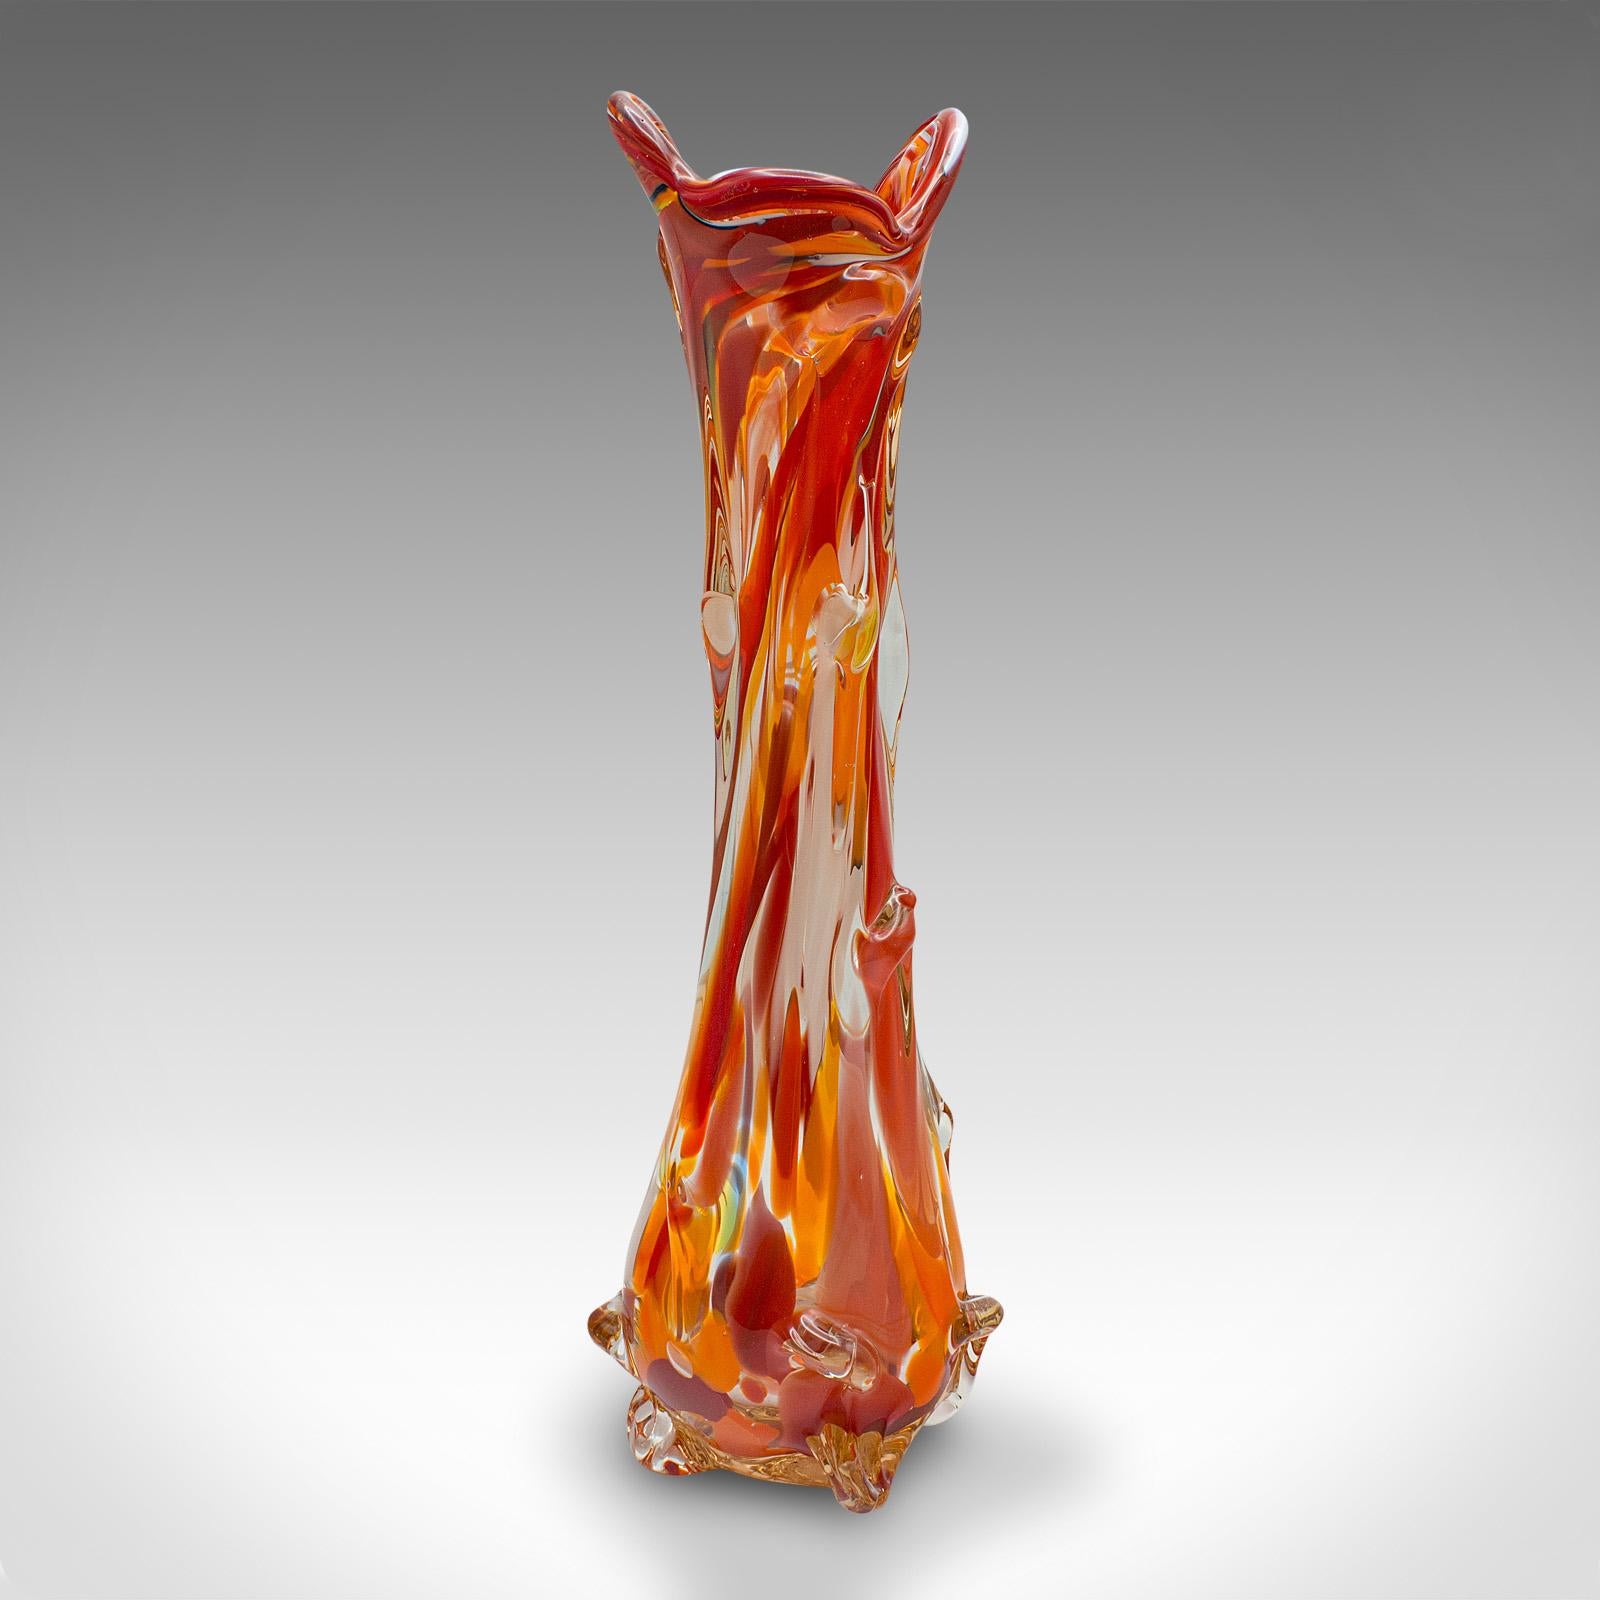 Tall Vintage Murano Explosion Vase, Italian, Art Glass, Flower Sleeve, C.1970 In Good Condition For Sale In Hele, Devon, GB